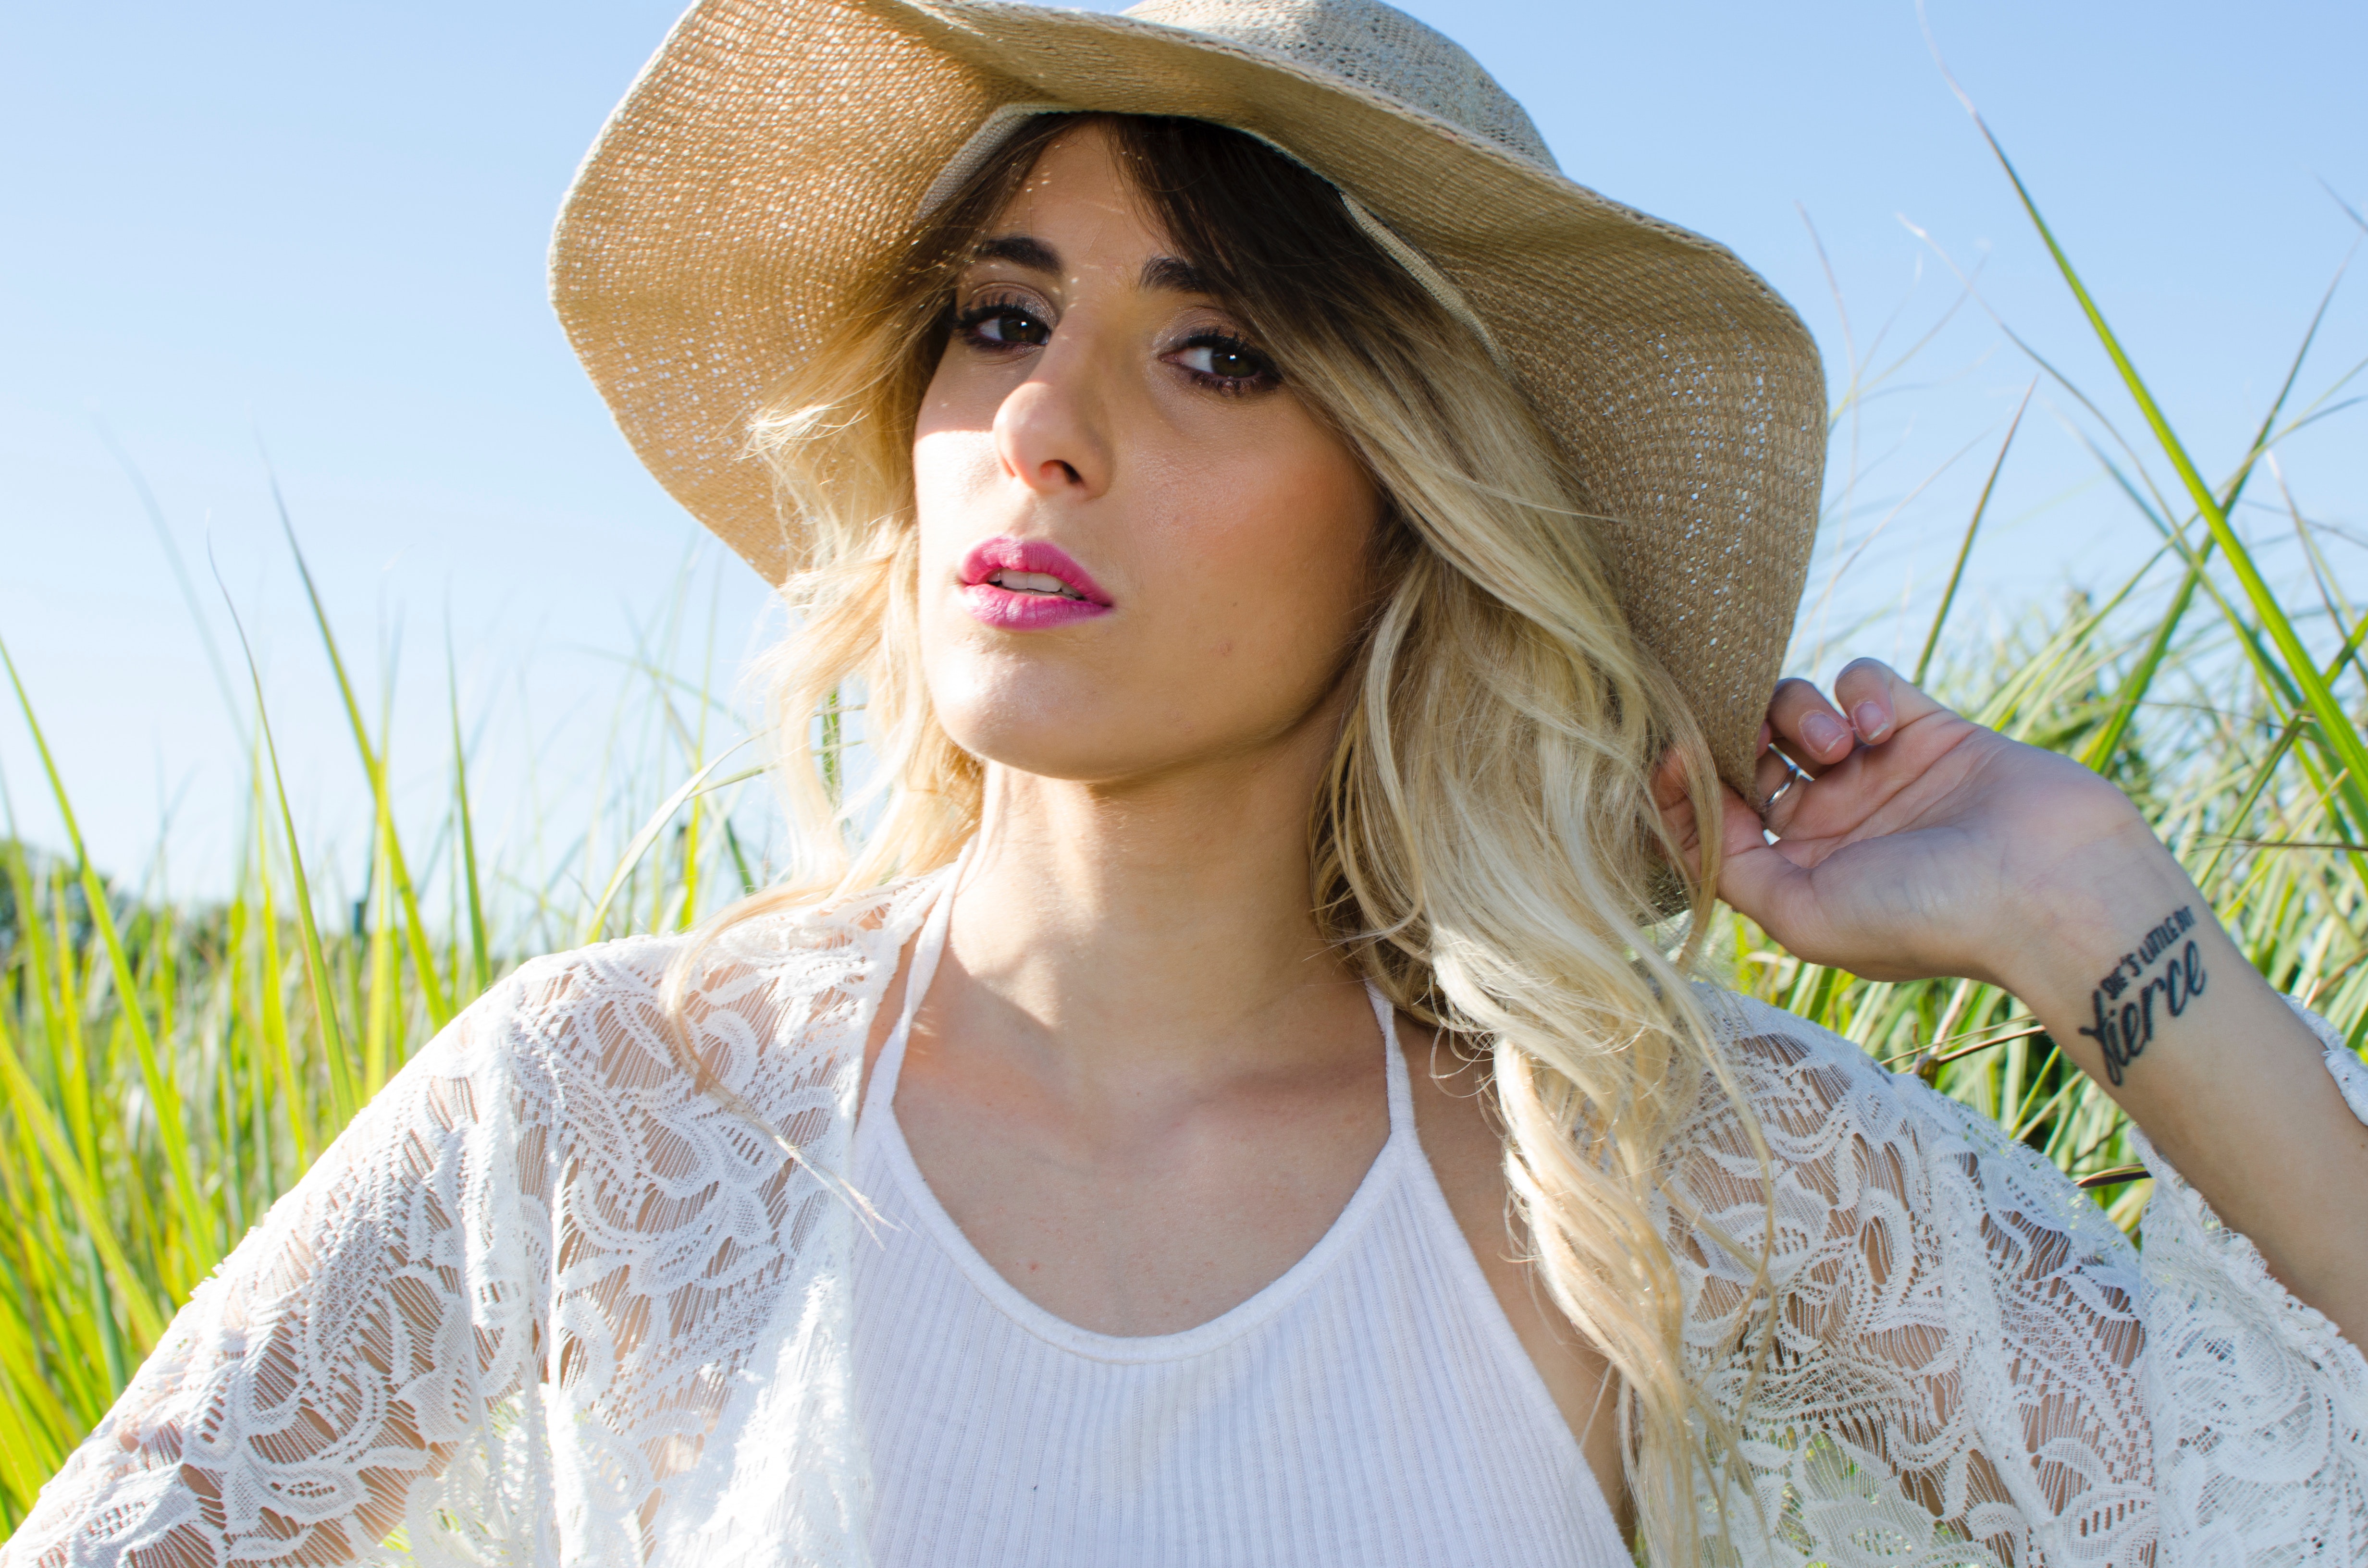 Woman wearing brown hat and white cardigan standing in middle of grass field photo